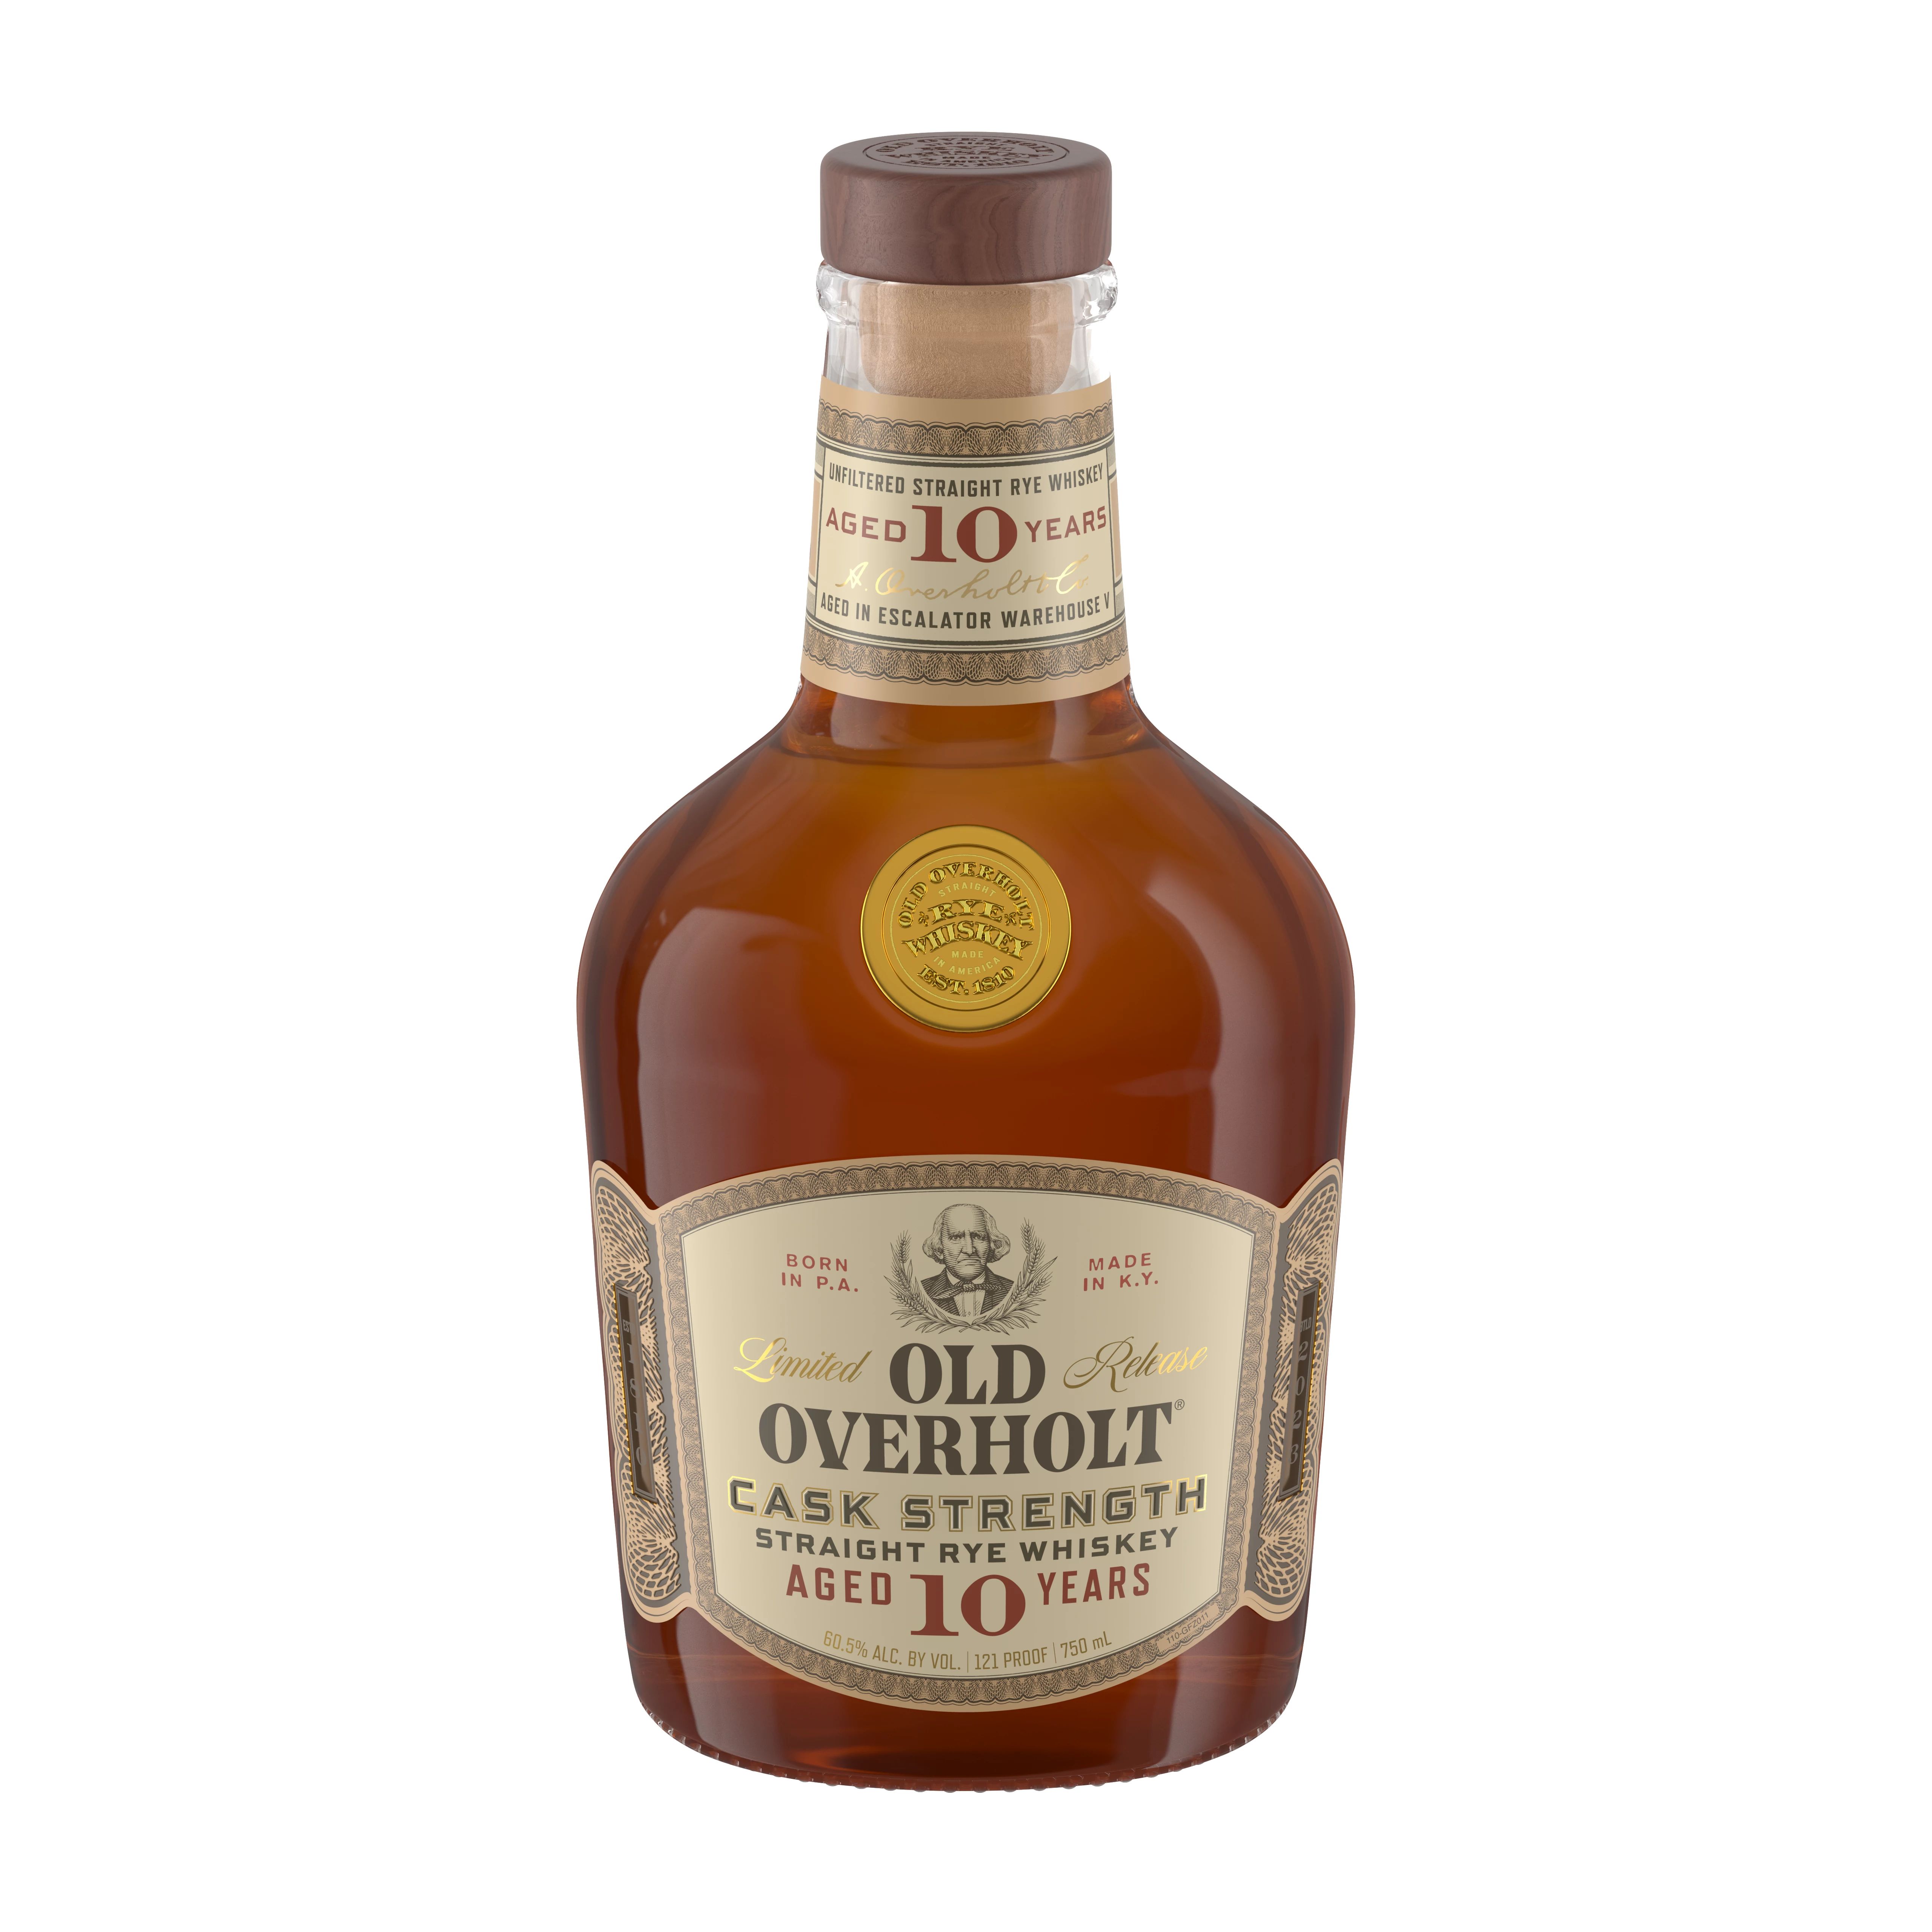 Introducing Old Overholt Extra Aged, Cask Strength Kentucky Rye Whiskey